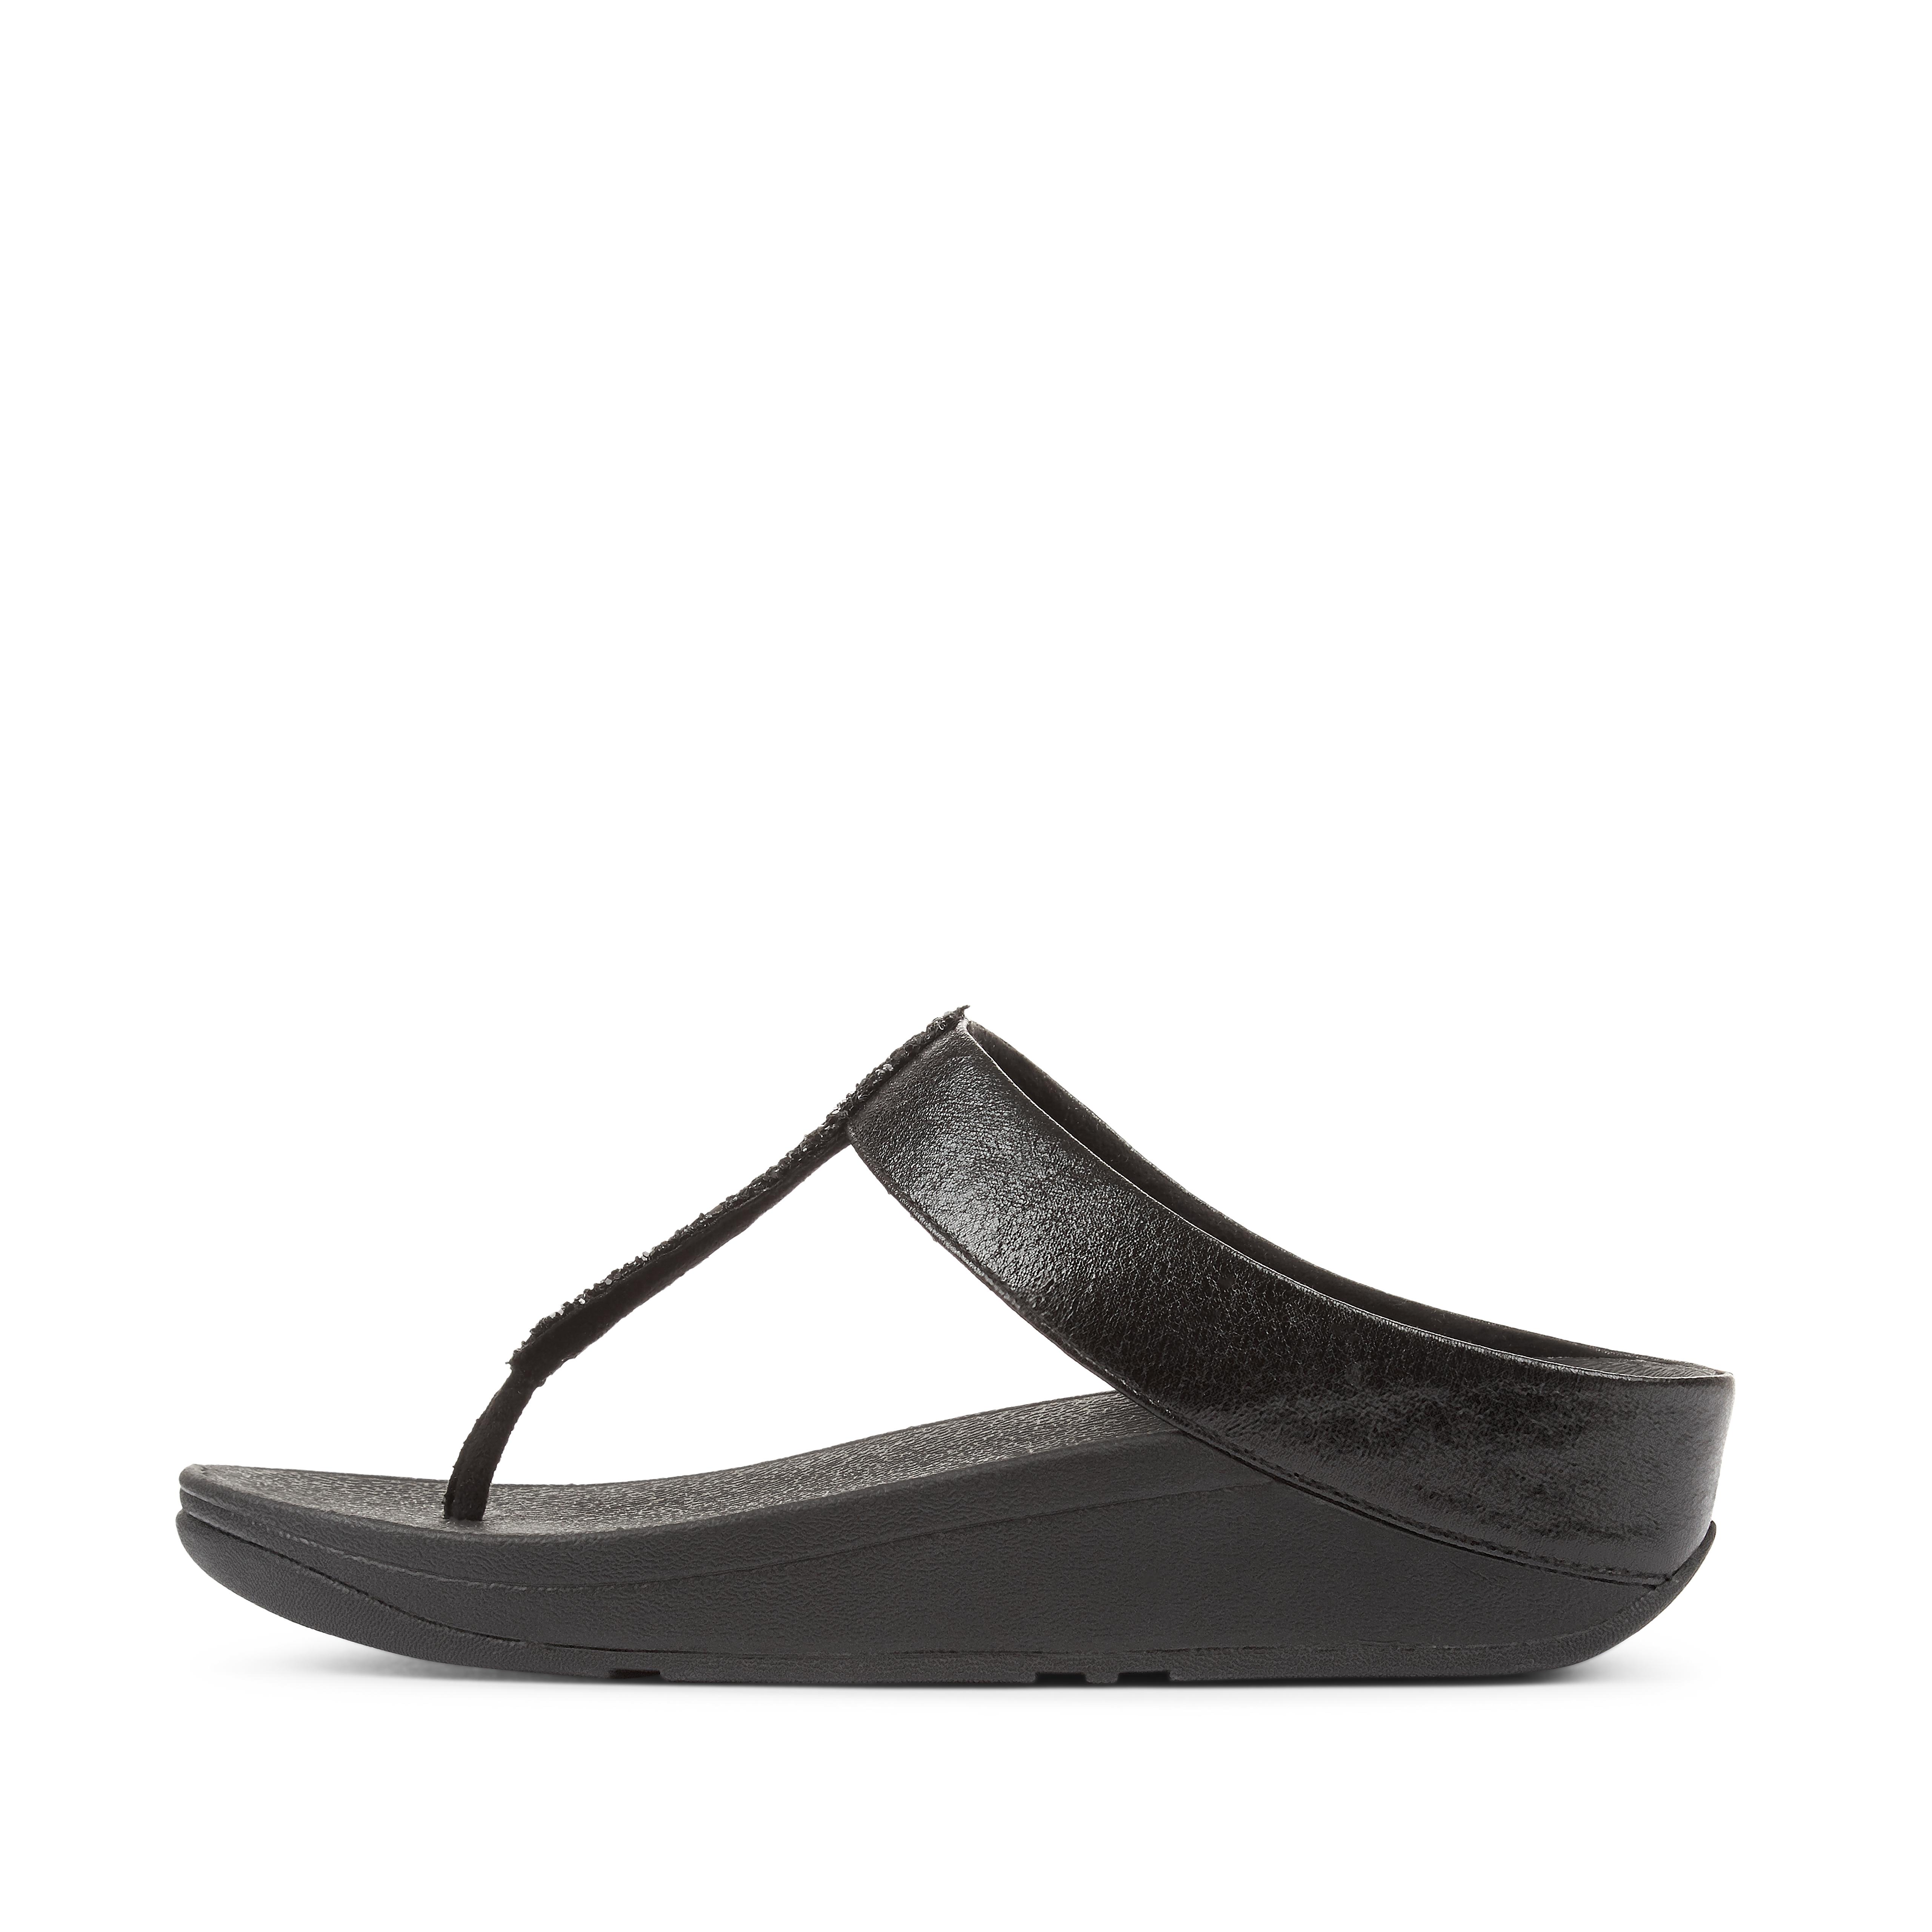 fitflop slippers womens uk